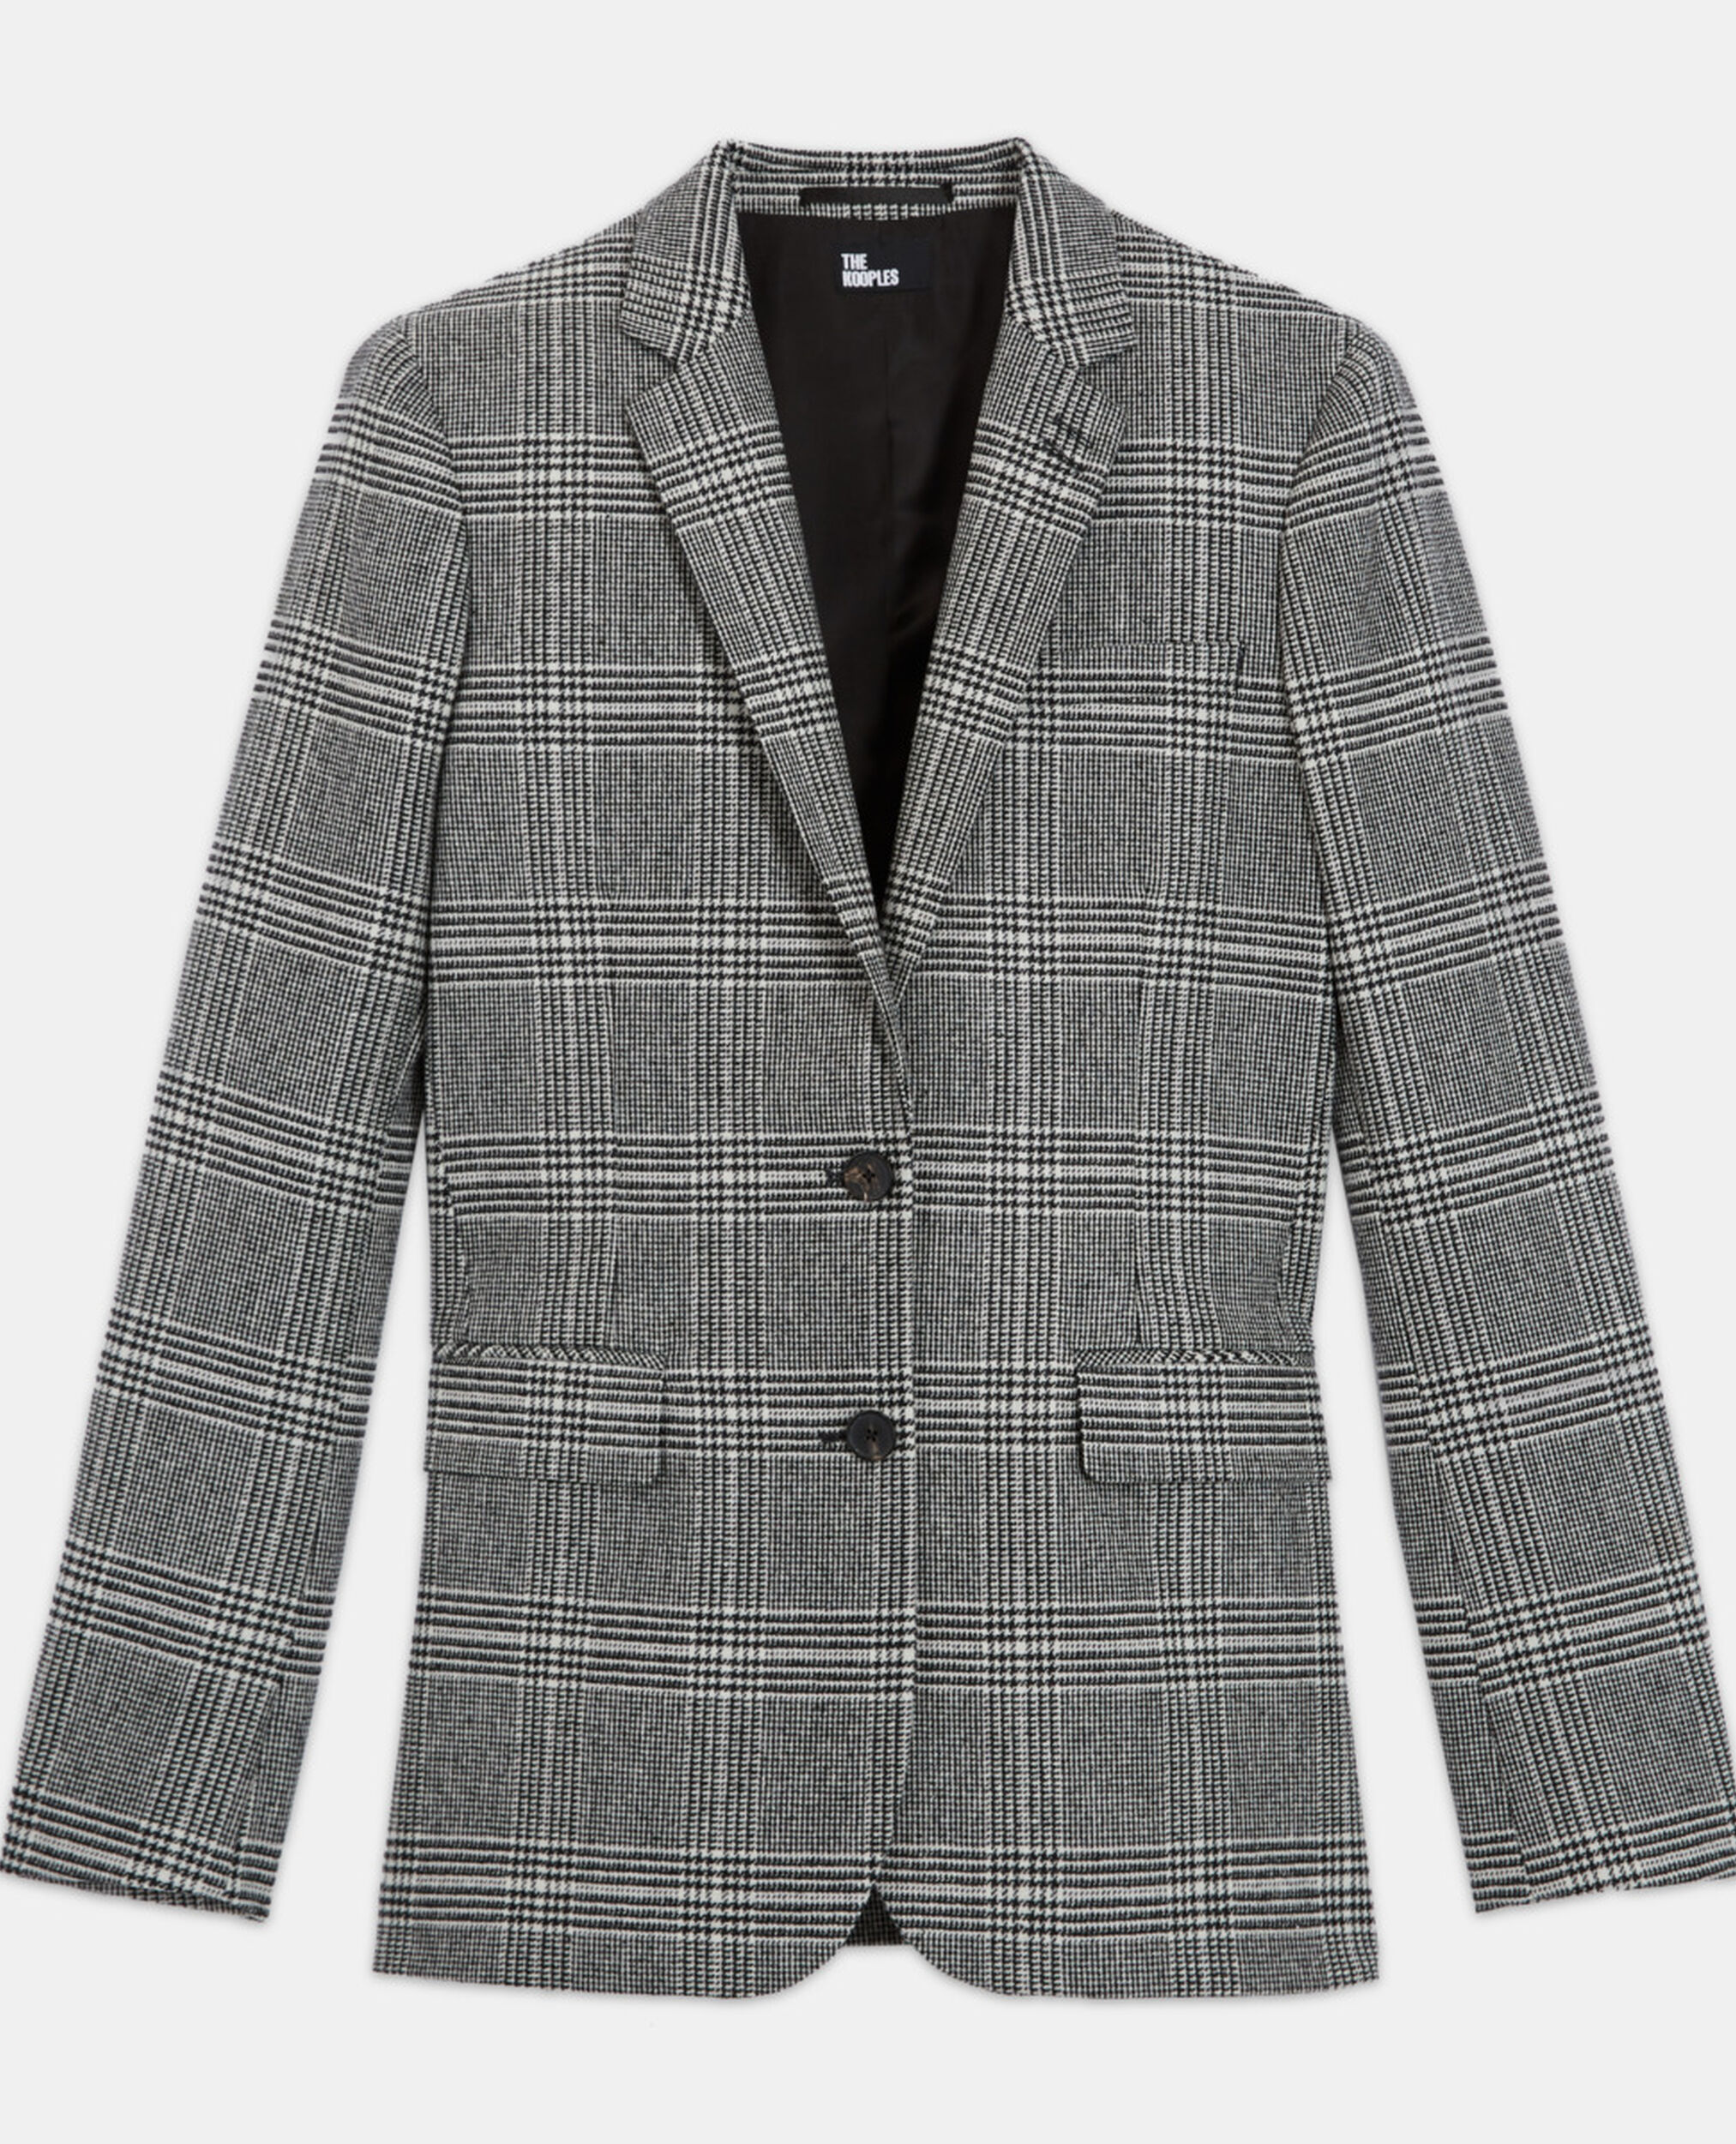 Wool jacket with check motif, BLACK WHITE, hi-res image number null